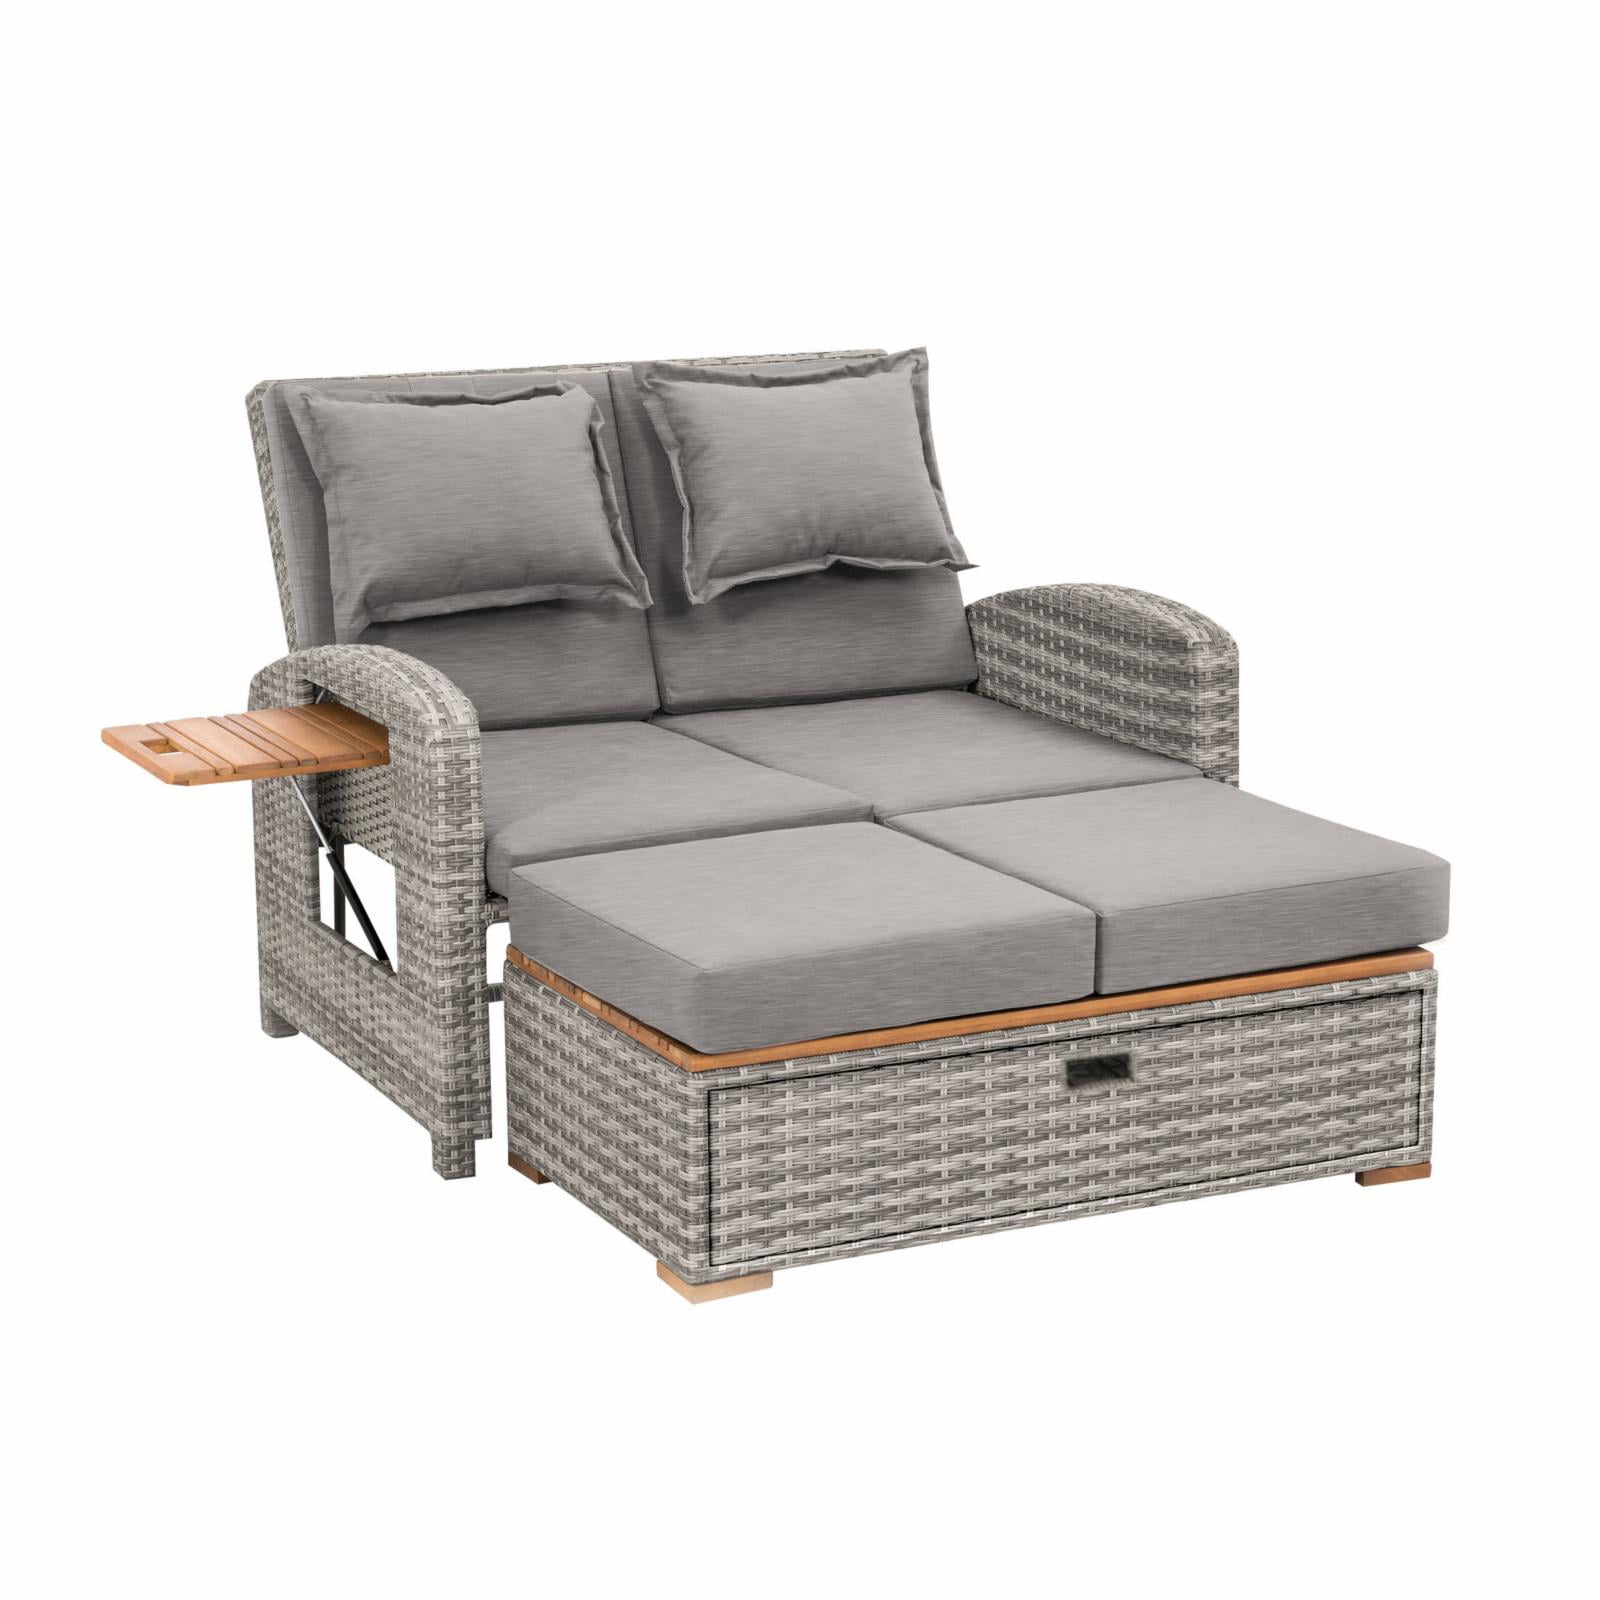 Greemotion Bahia Tobago Solid Teak Wood Outdoor Modular Daybed in  Gray/Natural